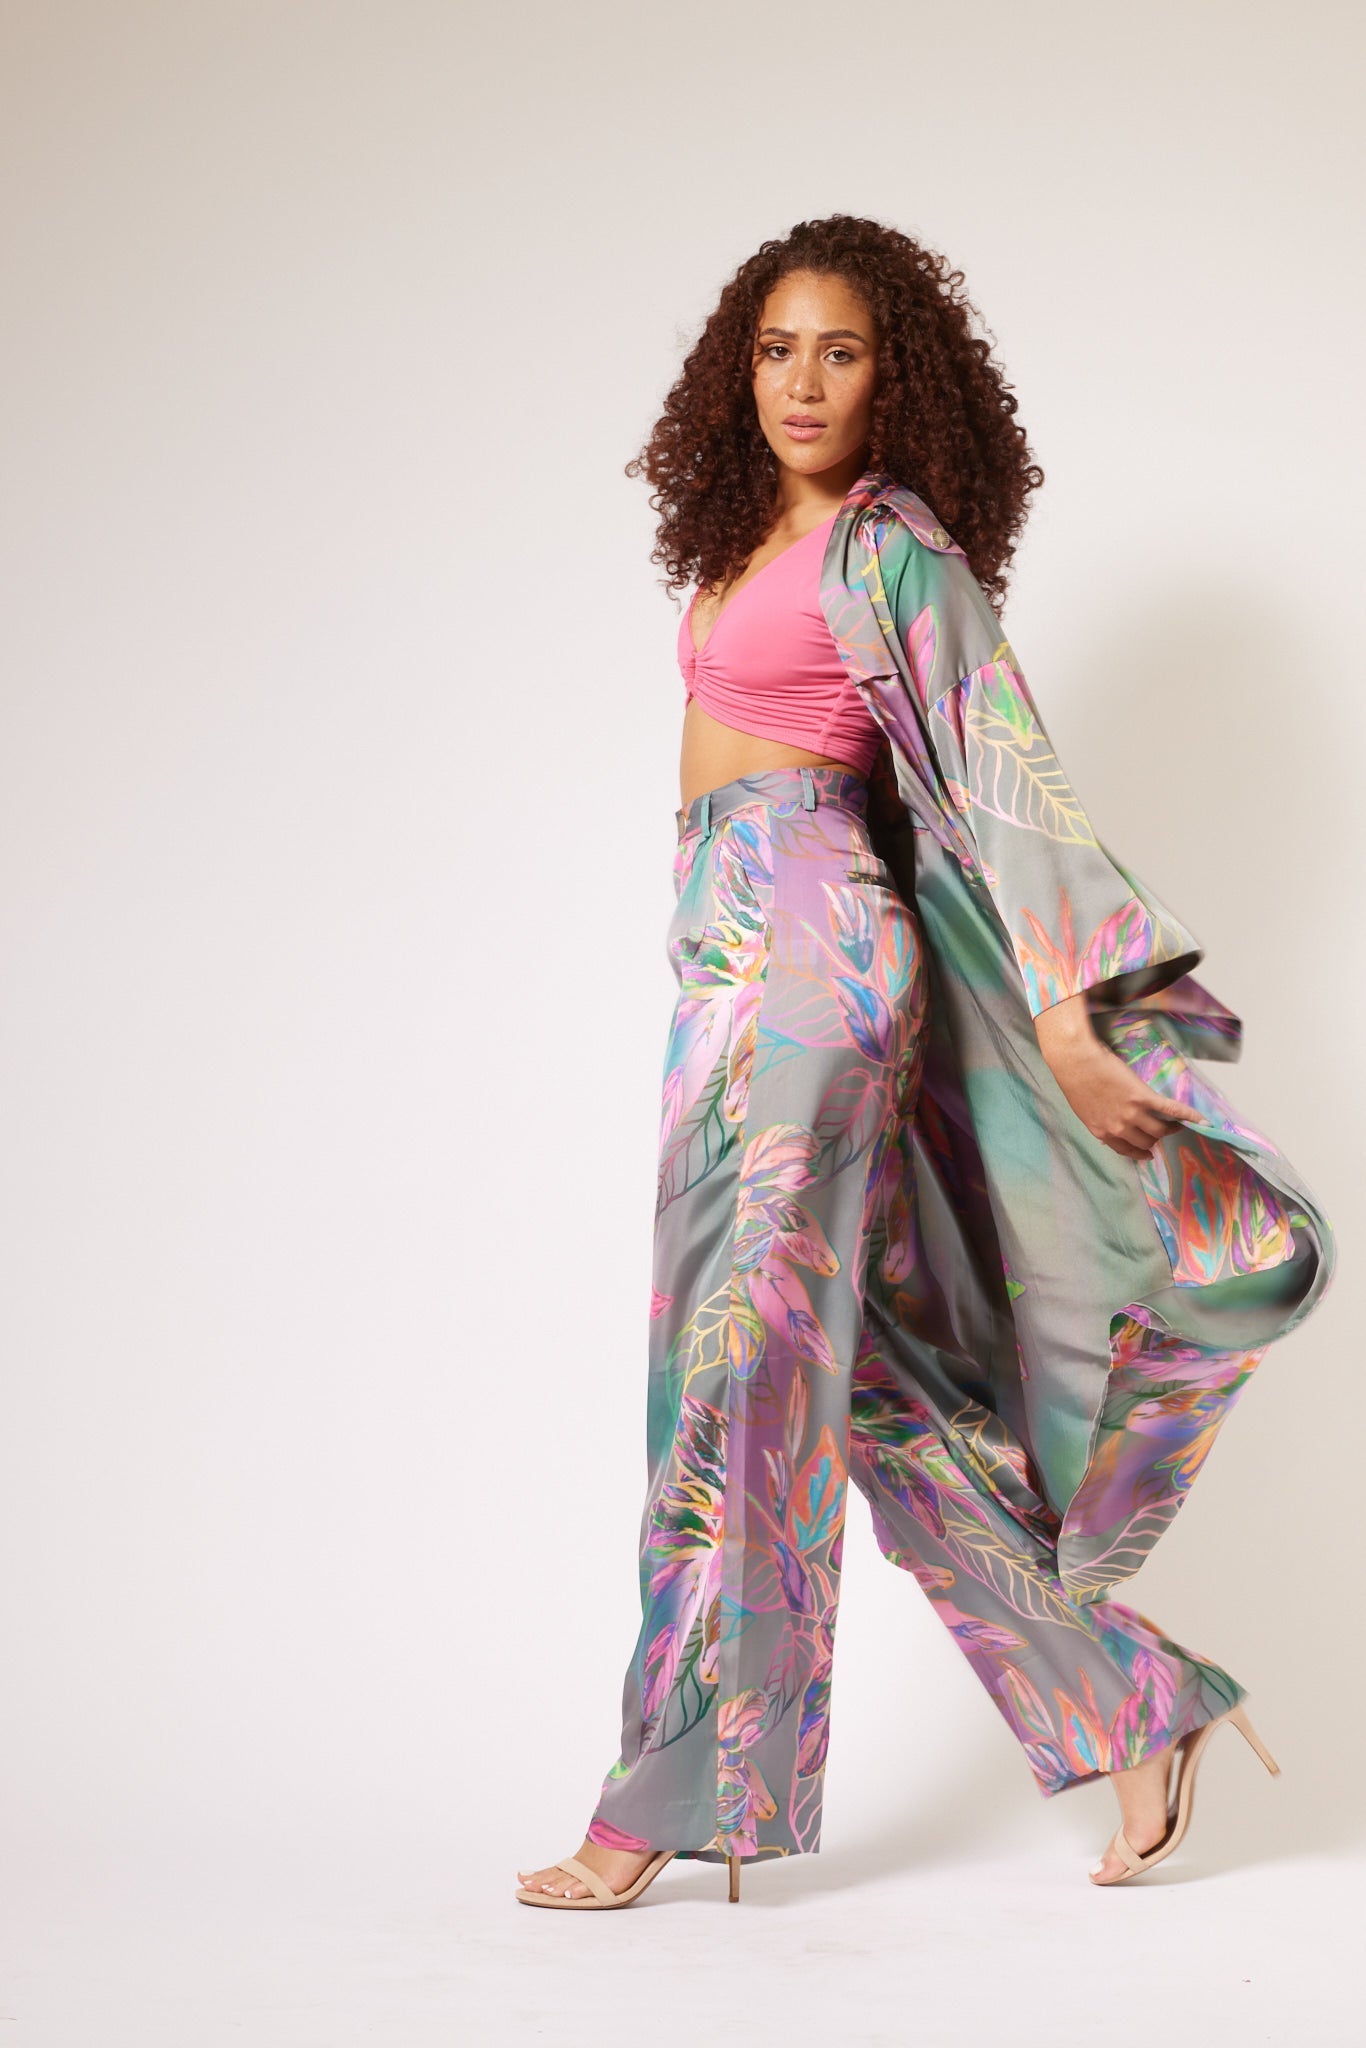 side profile of woman modelling all over multicolored tropical print kimono duster and matching yacht slacks made with recycled textiles 3